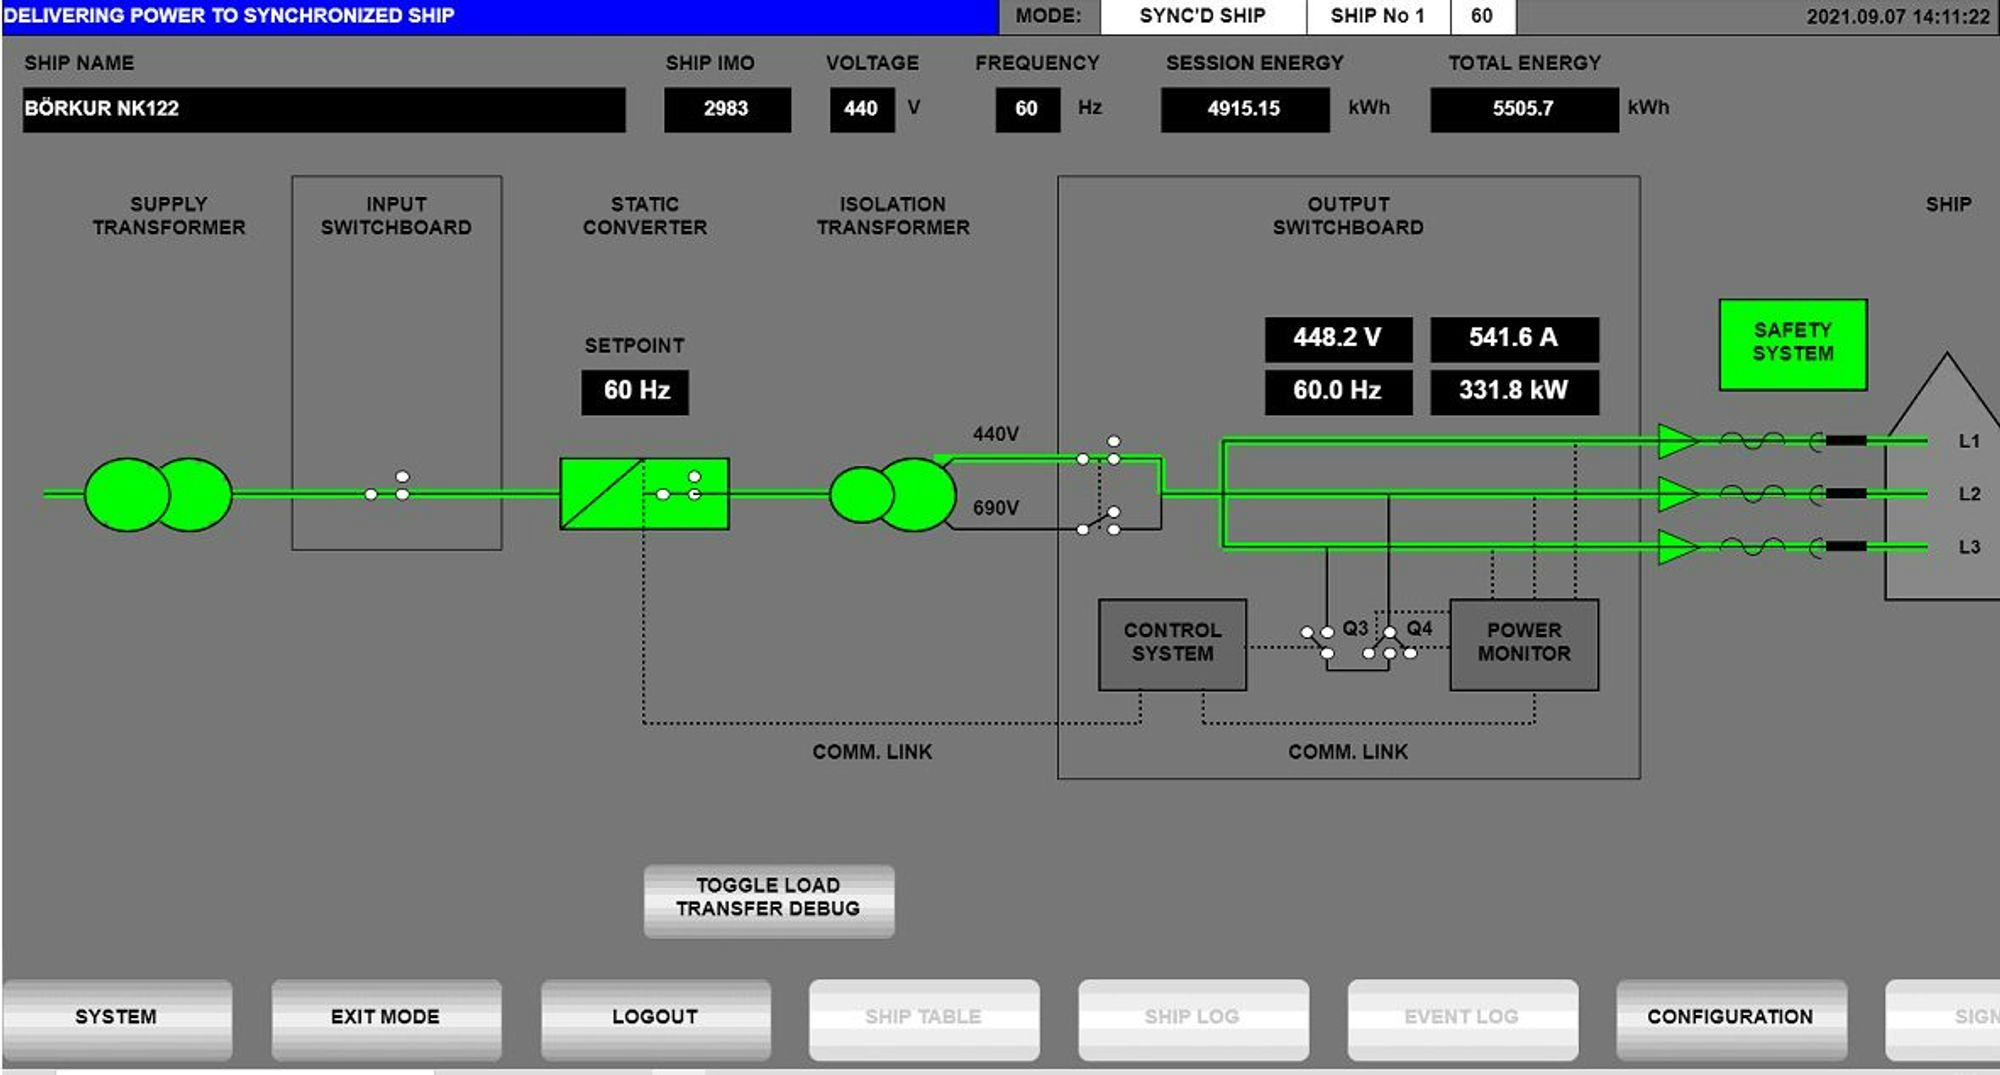 The picture shows graphical user interface with various electrical controls